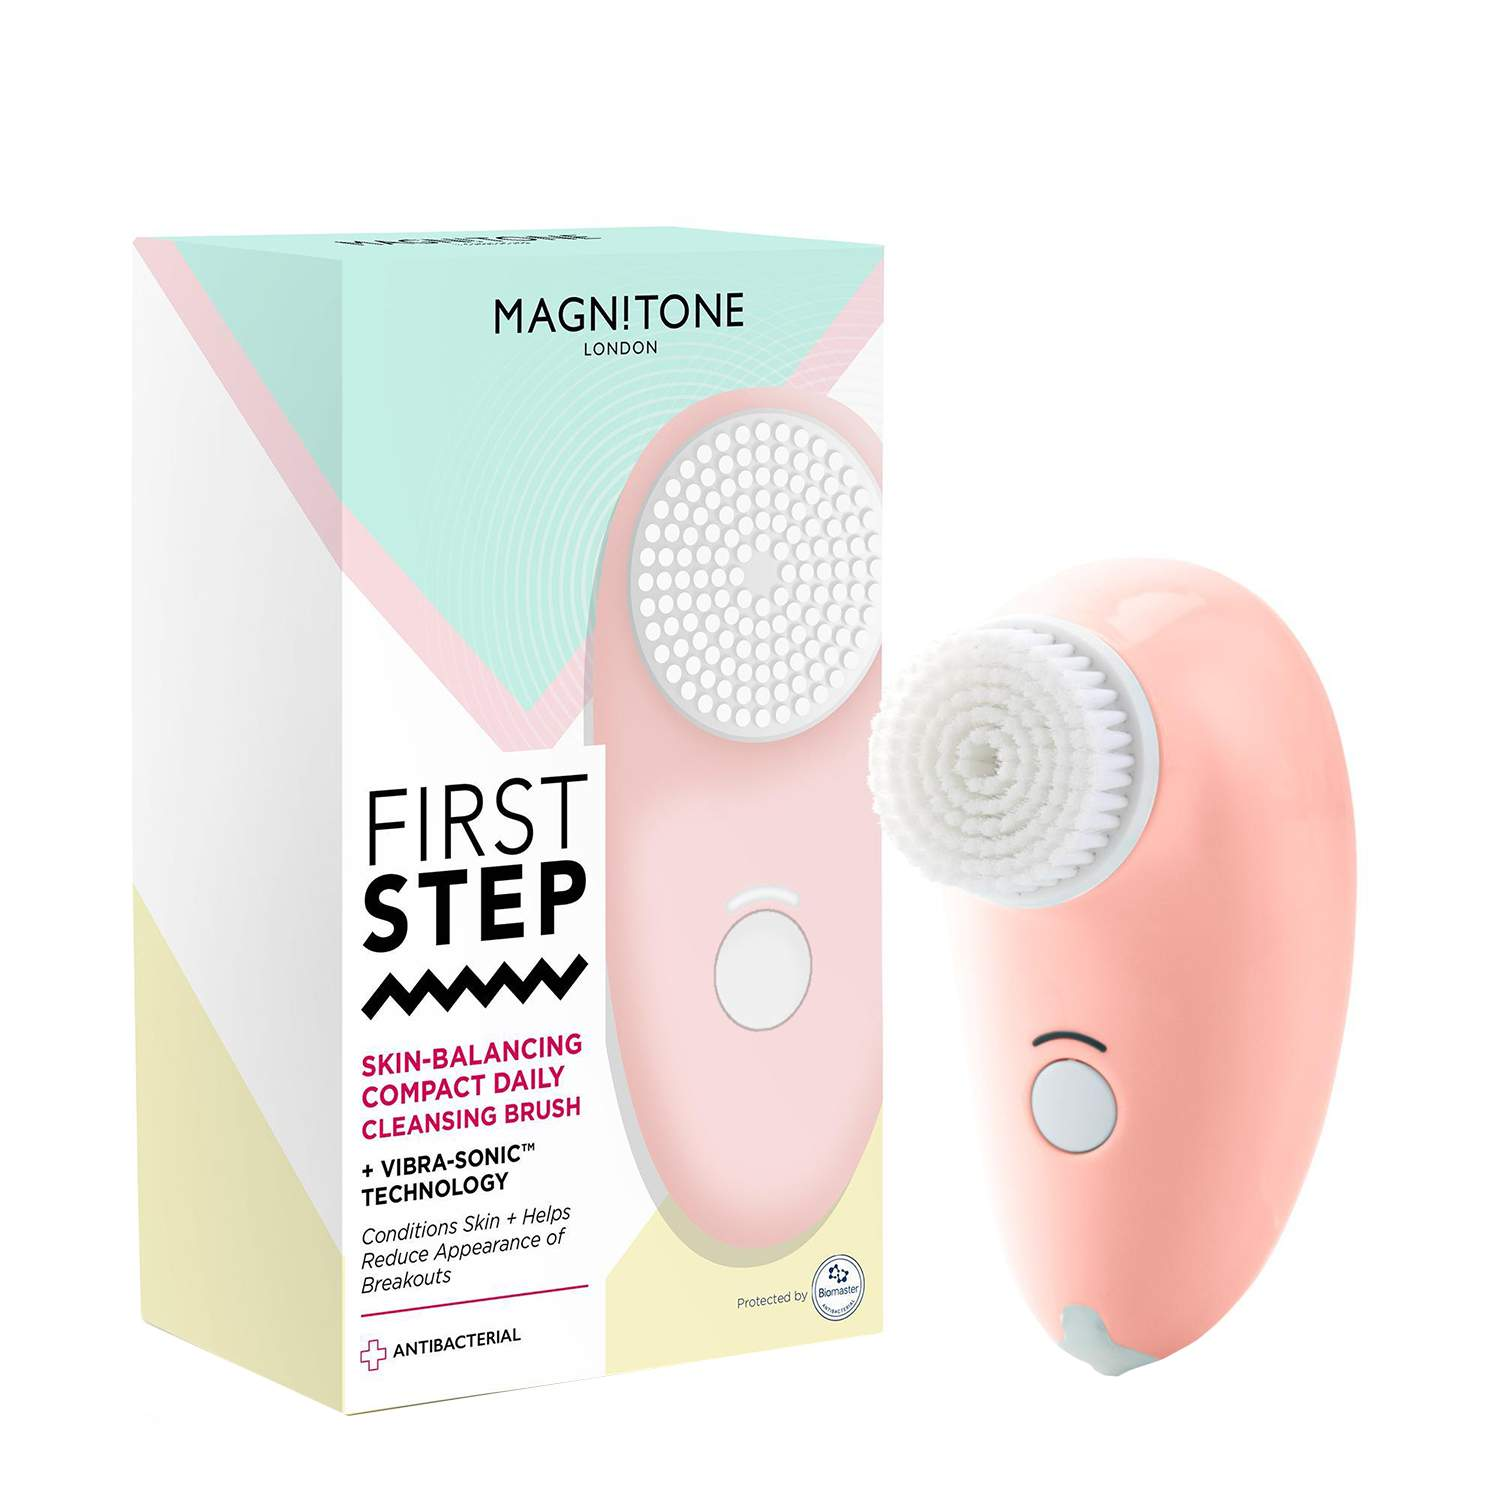 Magnitone London The First Step Compact Cleansing Brush - Pink Magnitone London The First Step Compact Cleansing Brush - Pink 1